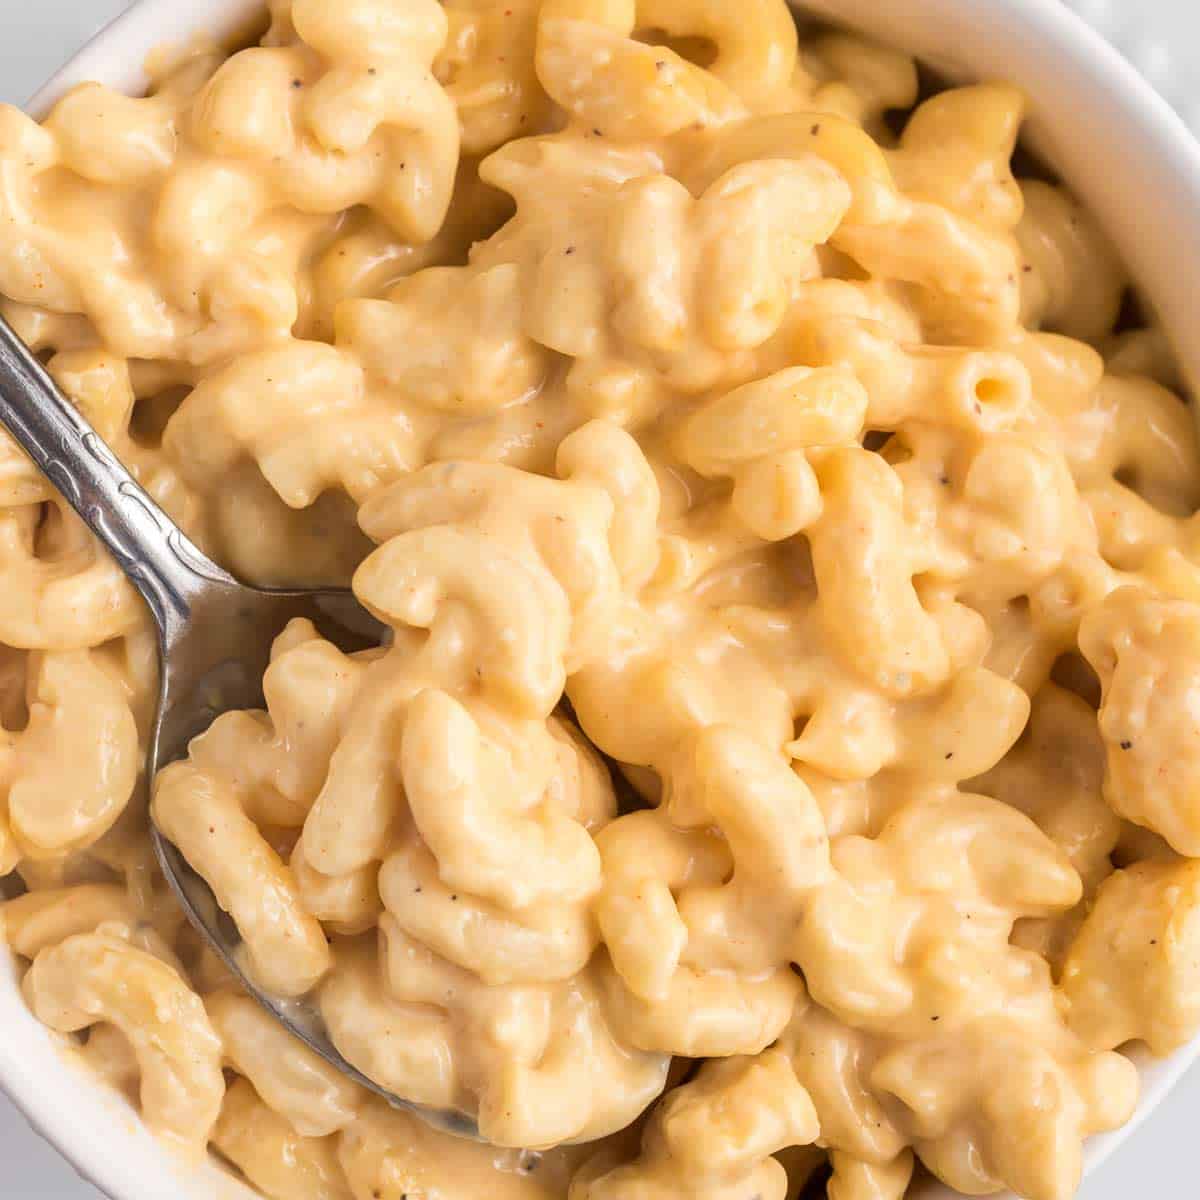 Ultra Creamy Baked Mac and Cheese